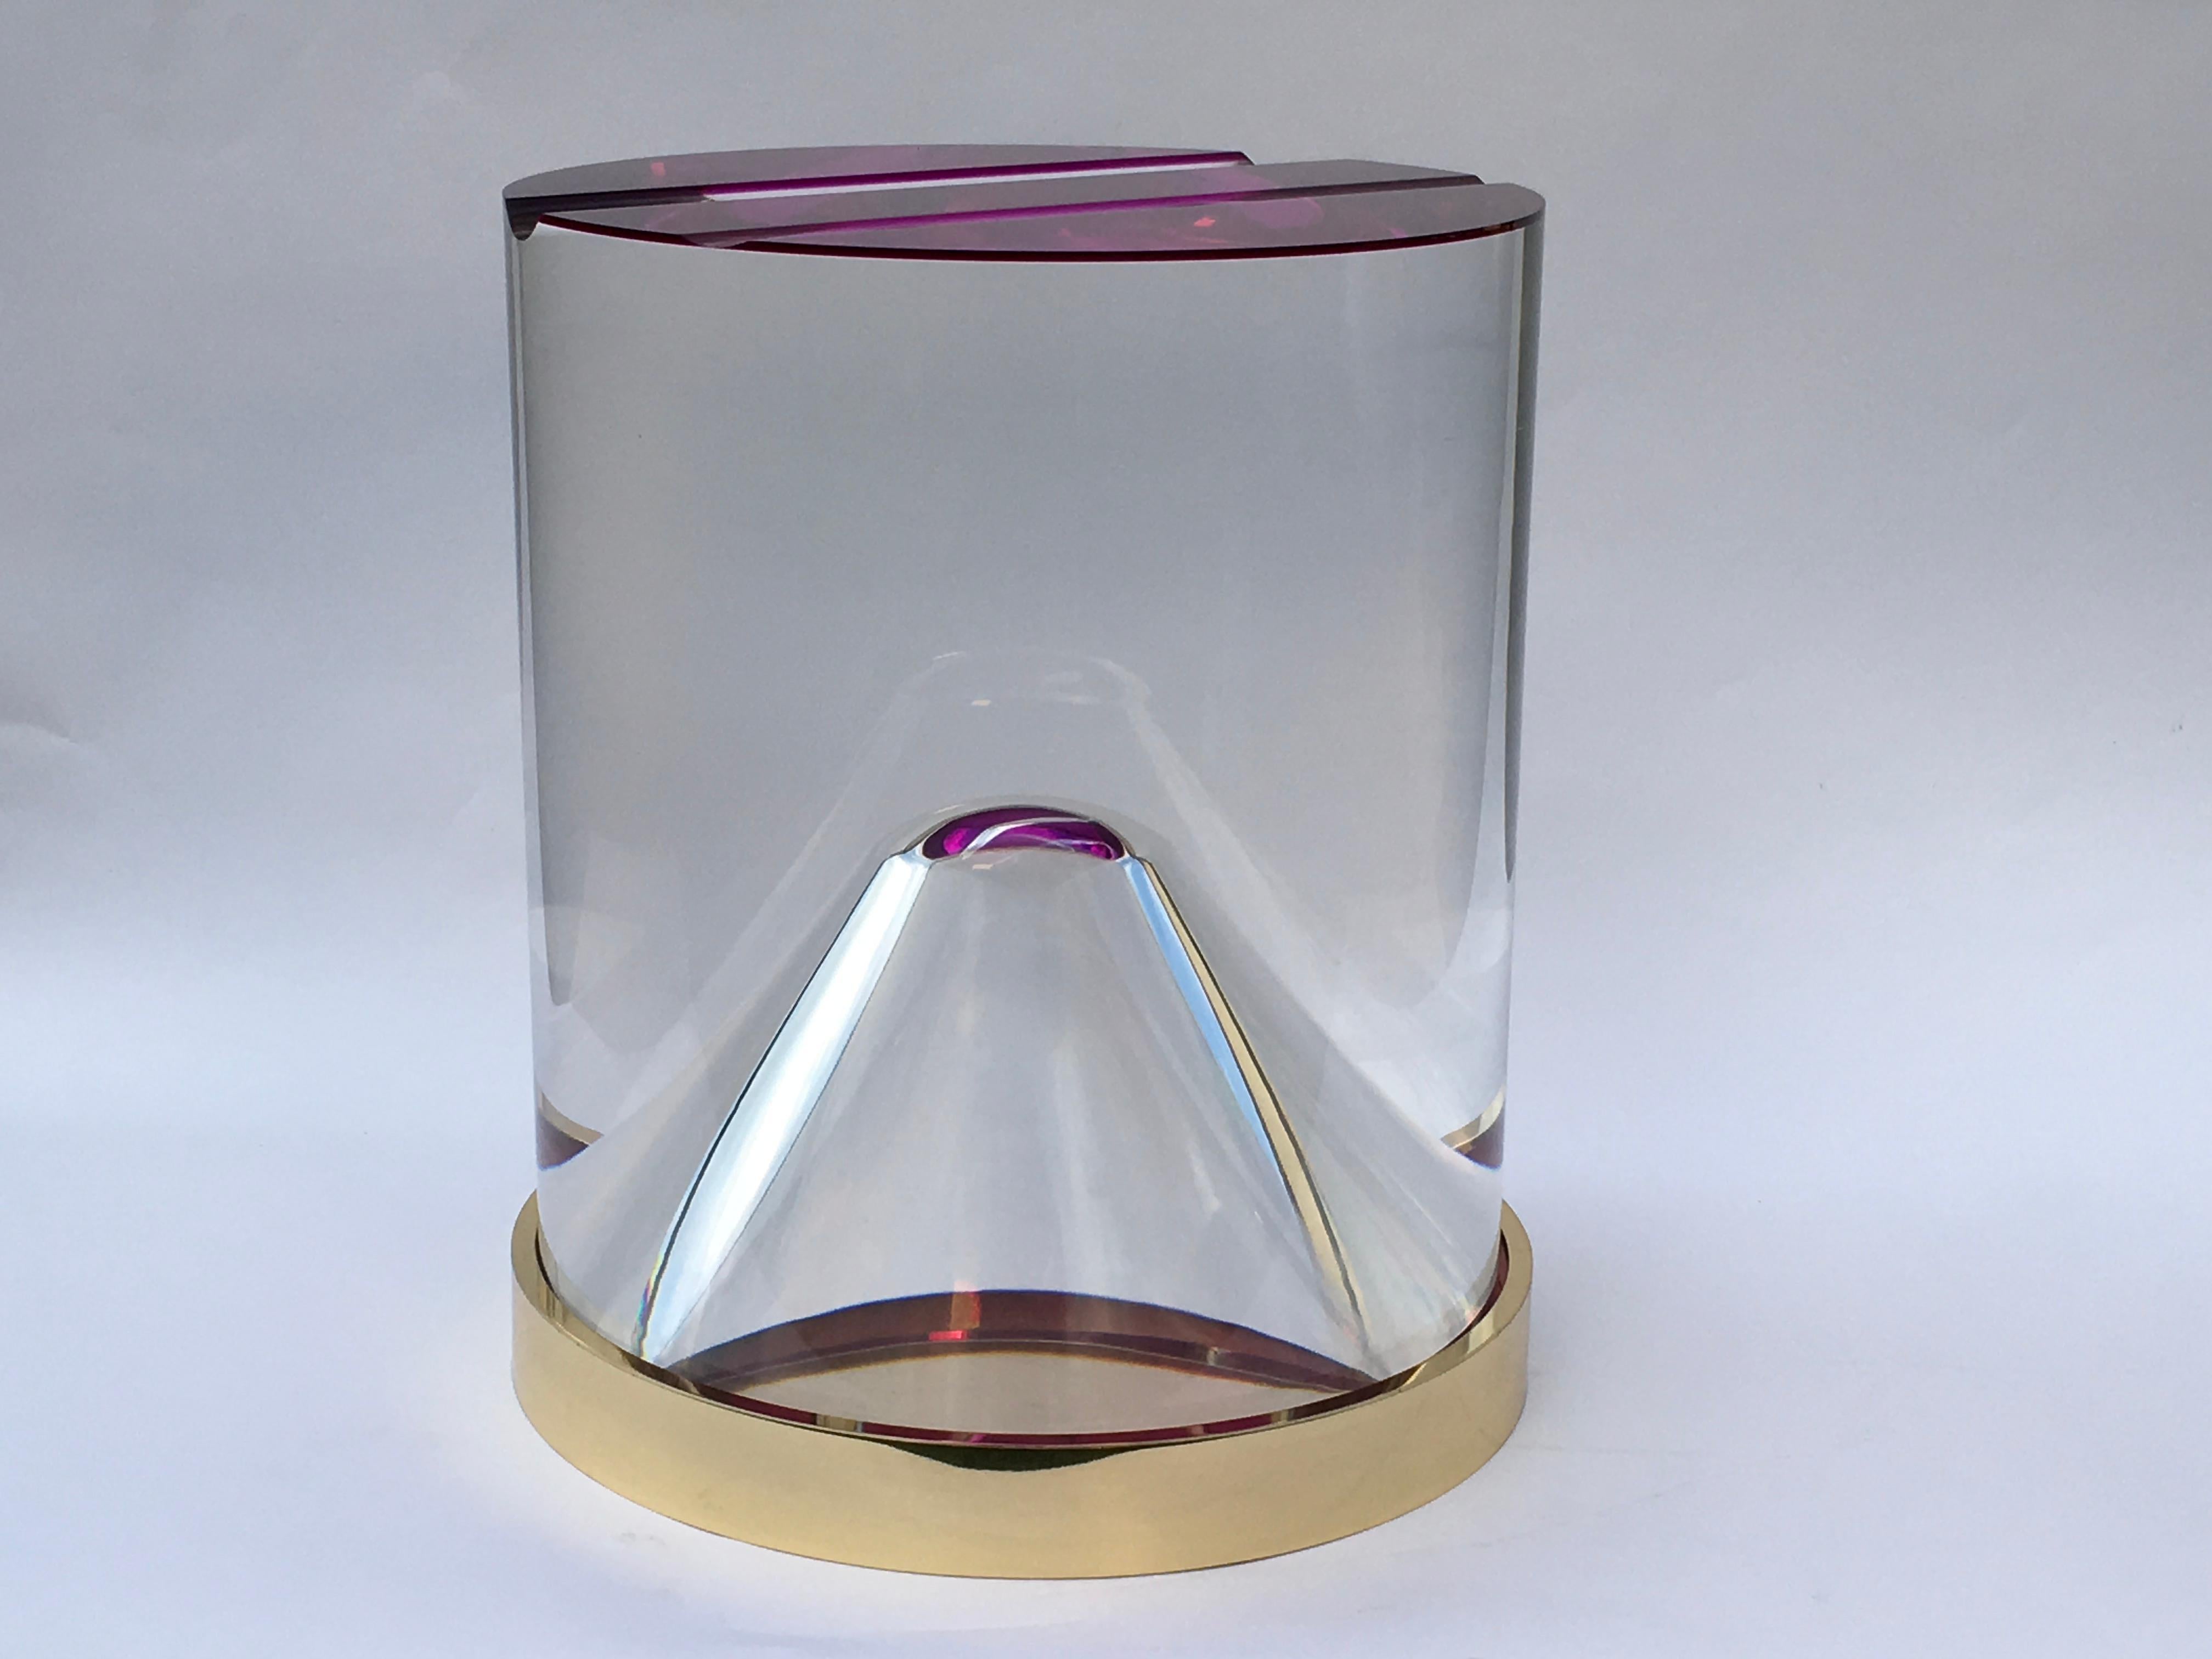 Coffee table, full cylinder in plexiglass with internal cavity and brass base designed by Studio Superego for Superego Editions. Purple/fuchsia color.

Biography
Superego Editions was born in 2006, performing a constant activity of research in